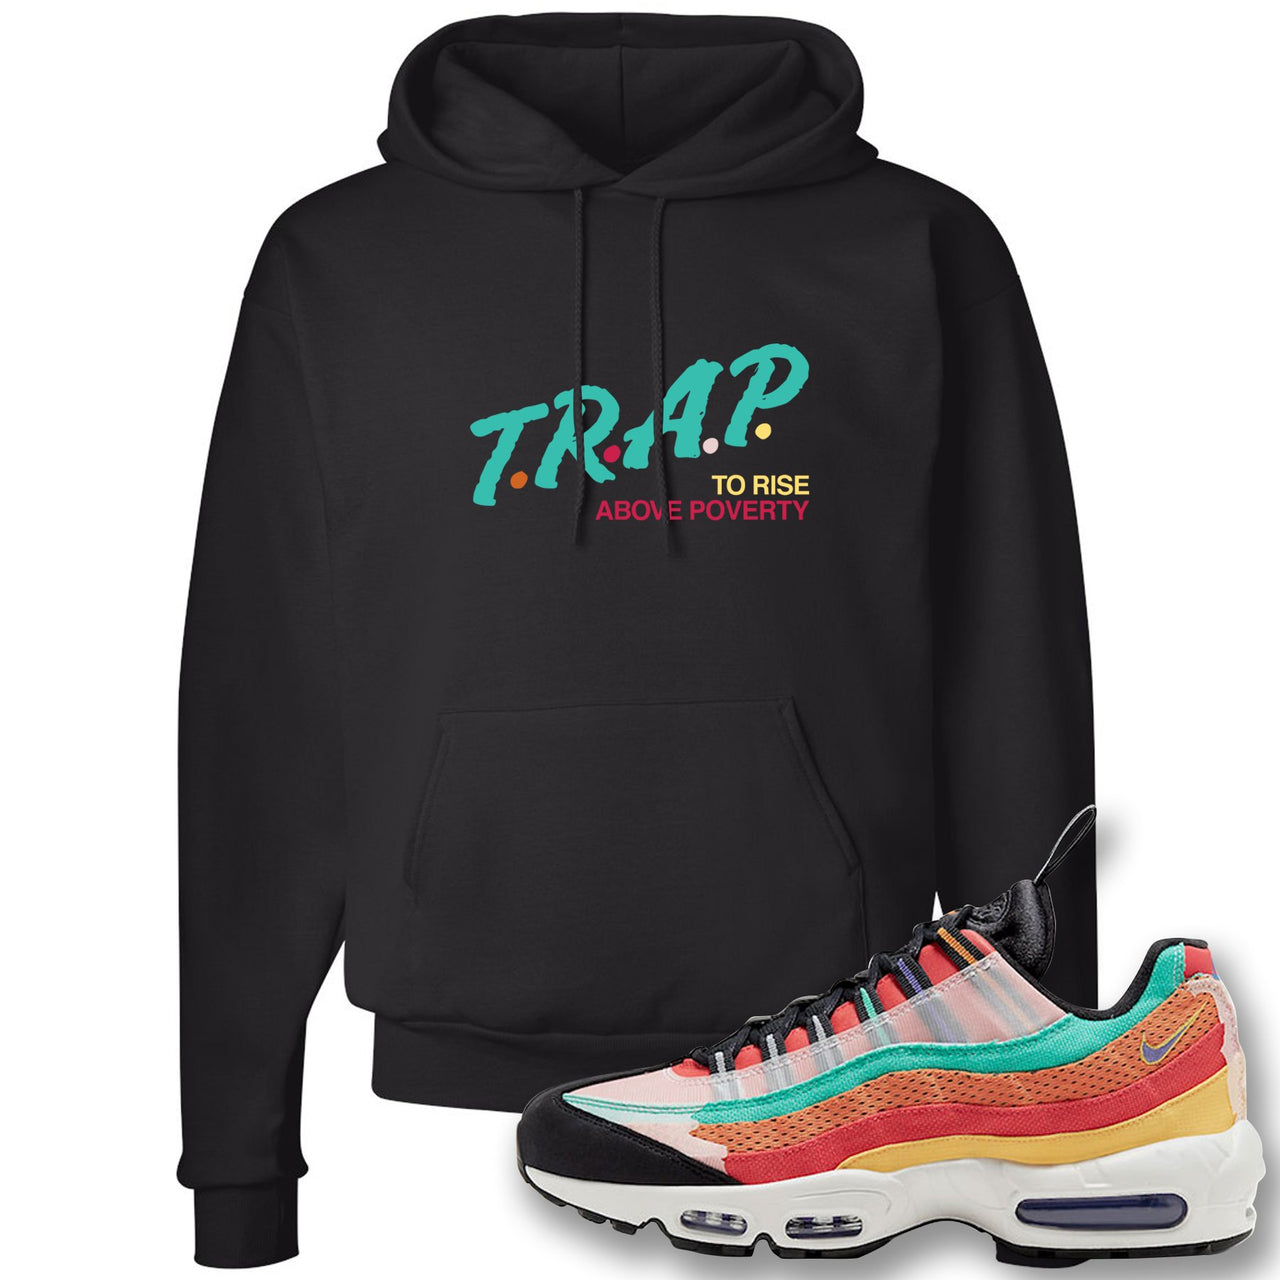 Air Max 95 Black History Month Sneaker Black Pullover Hoodie | Hoodie to match Nike Air Max 95 Black History Month Shoes | Trap To Rise Above Poverty